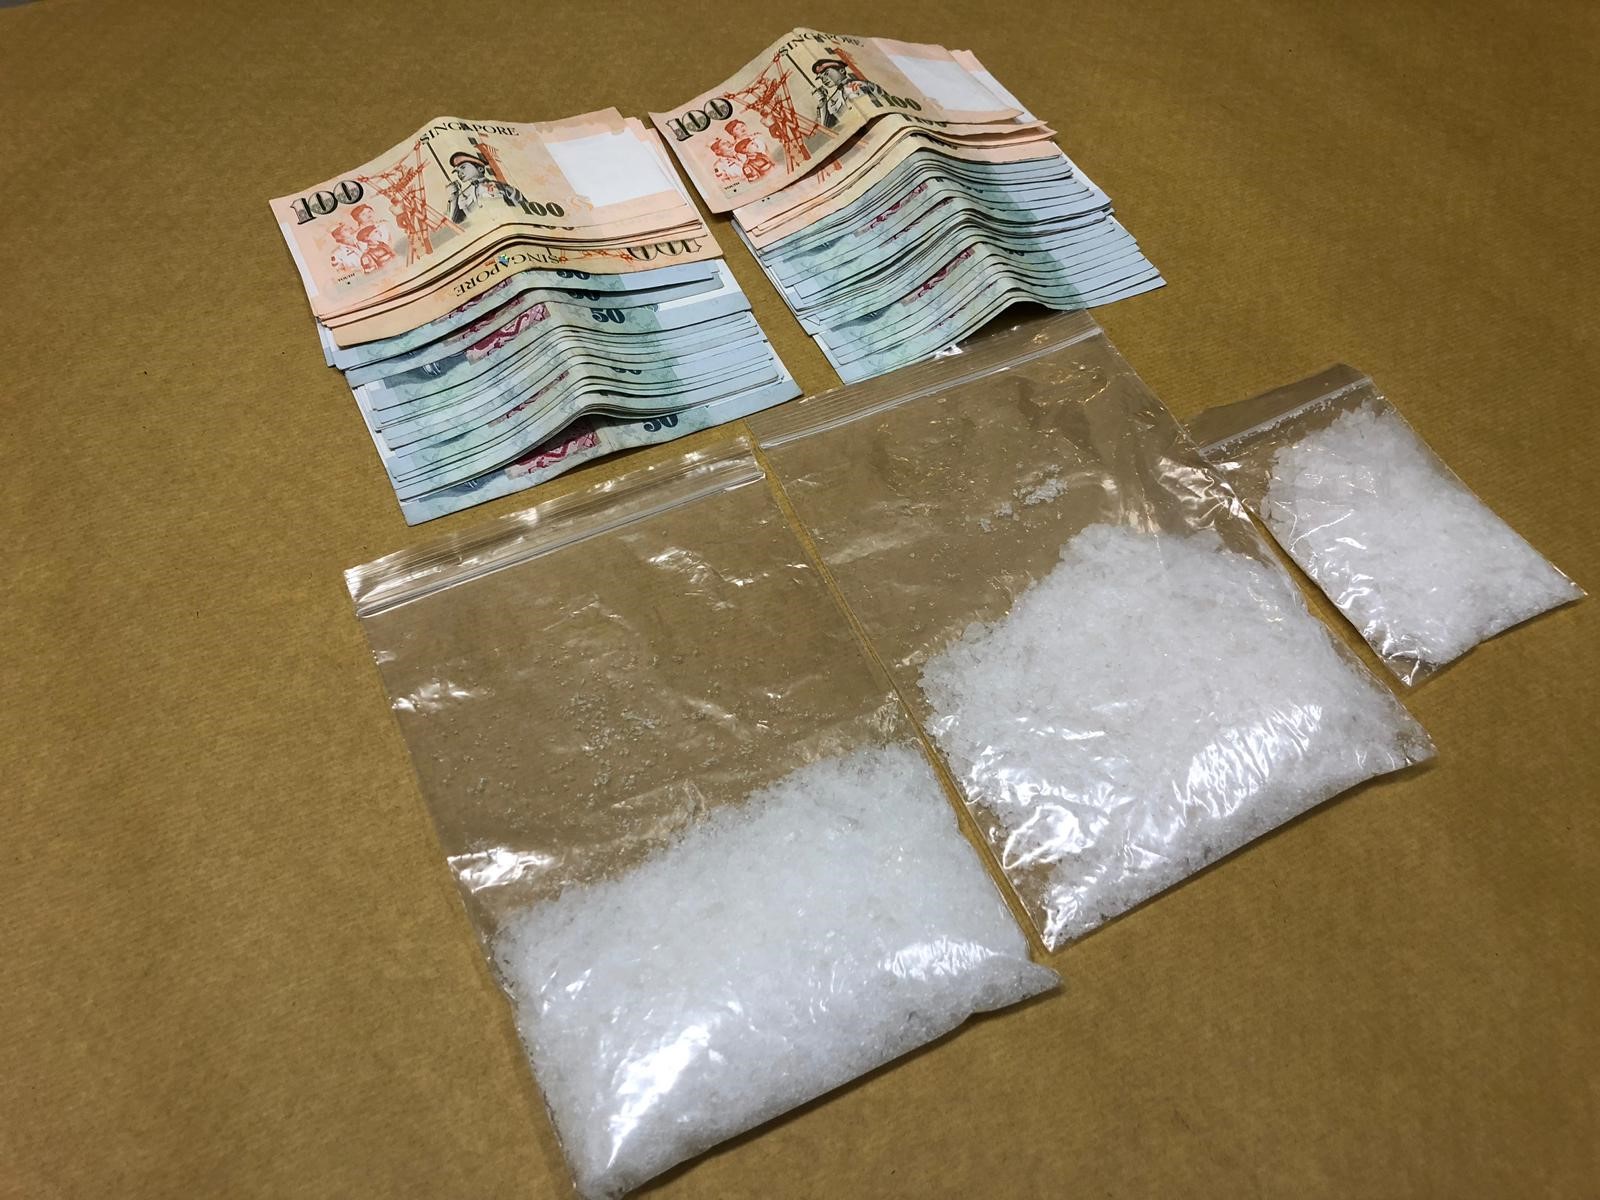 Photo-1 (CNB):  Drugs and cash seized in one of CNB’s island-wide operation on 1 Aug 2019.  The island-wide operation from 22 July to 2 August 2019 saw the arrest of 192 suspected drug offenders.